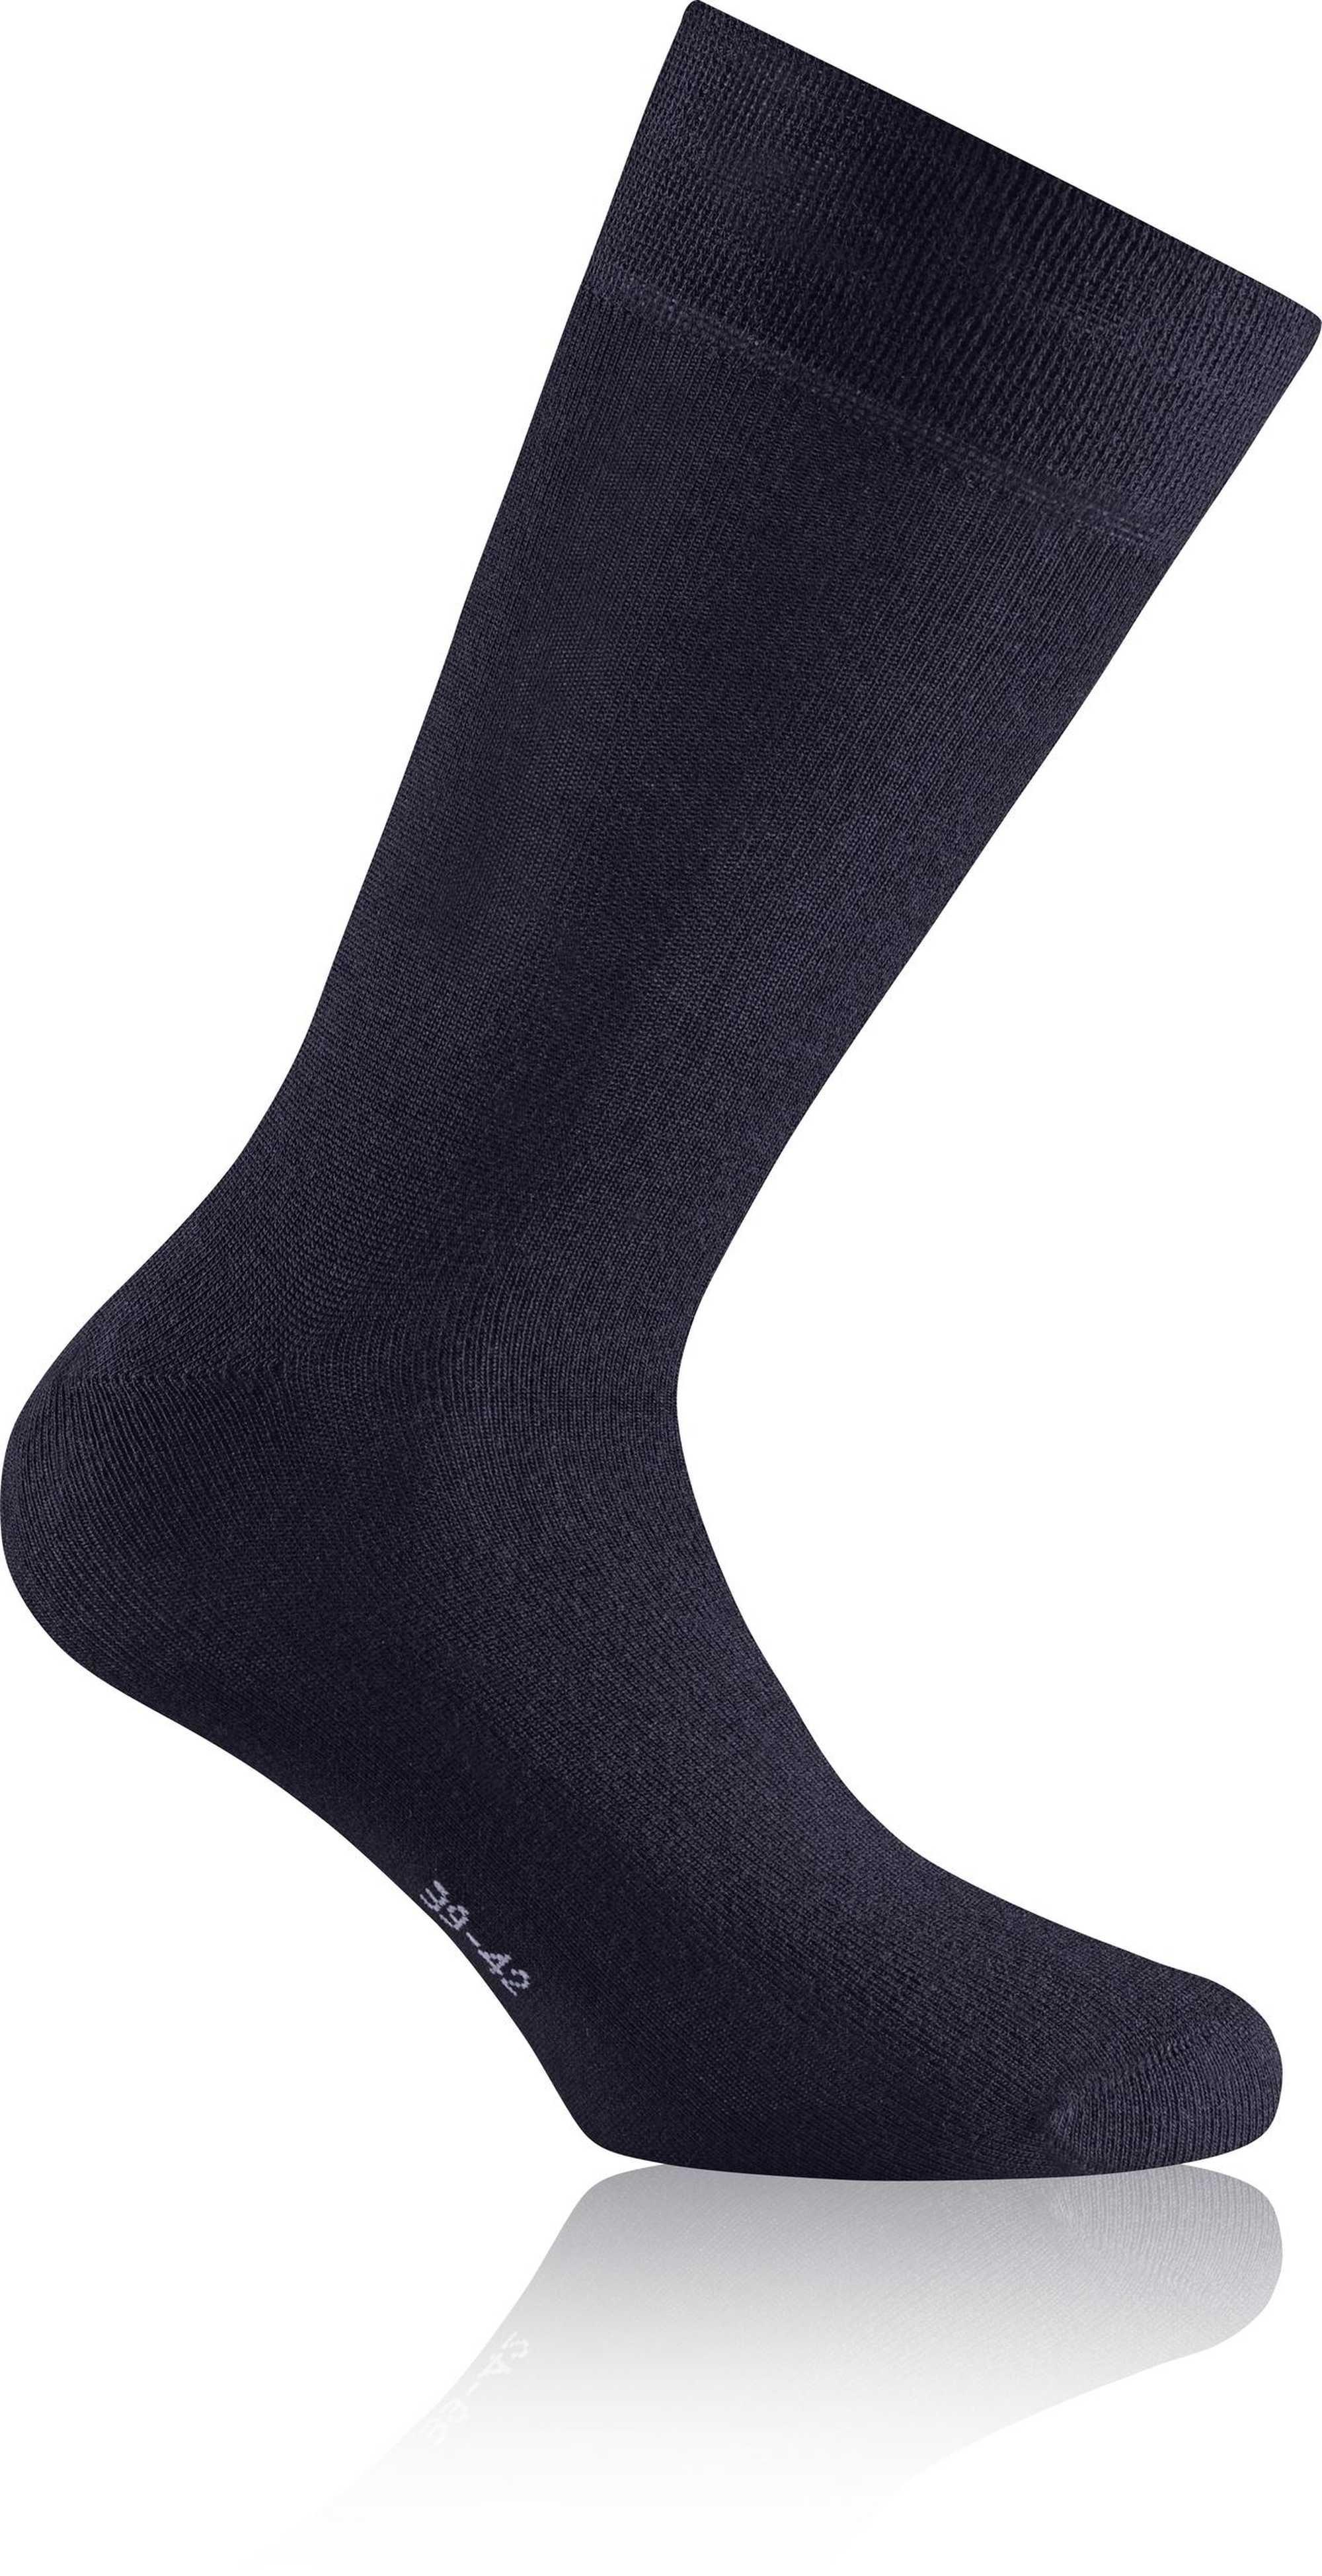 Rohner  Chaussettes  Confortable à porter-Bamboo 2er pack 